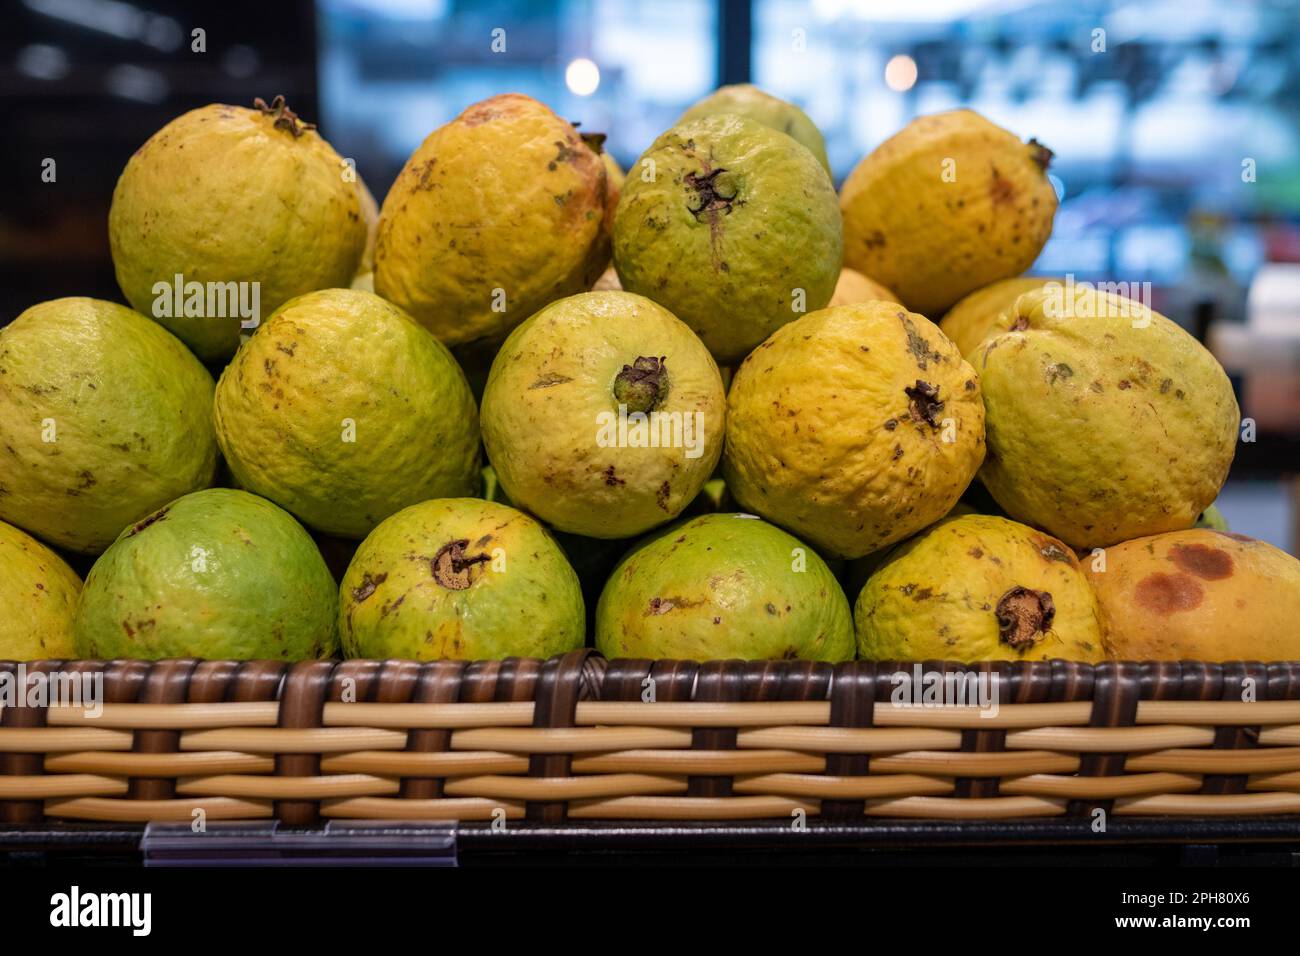 Guava for sale in a grocery store in Brazil Stock Photo